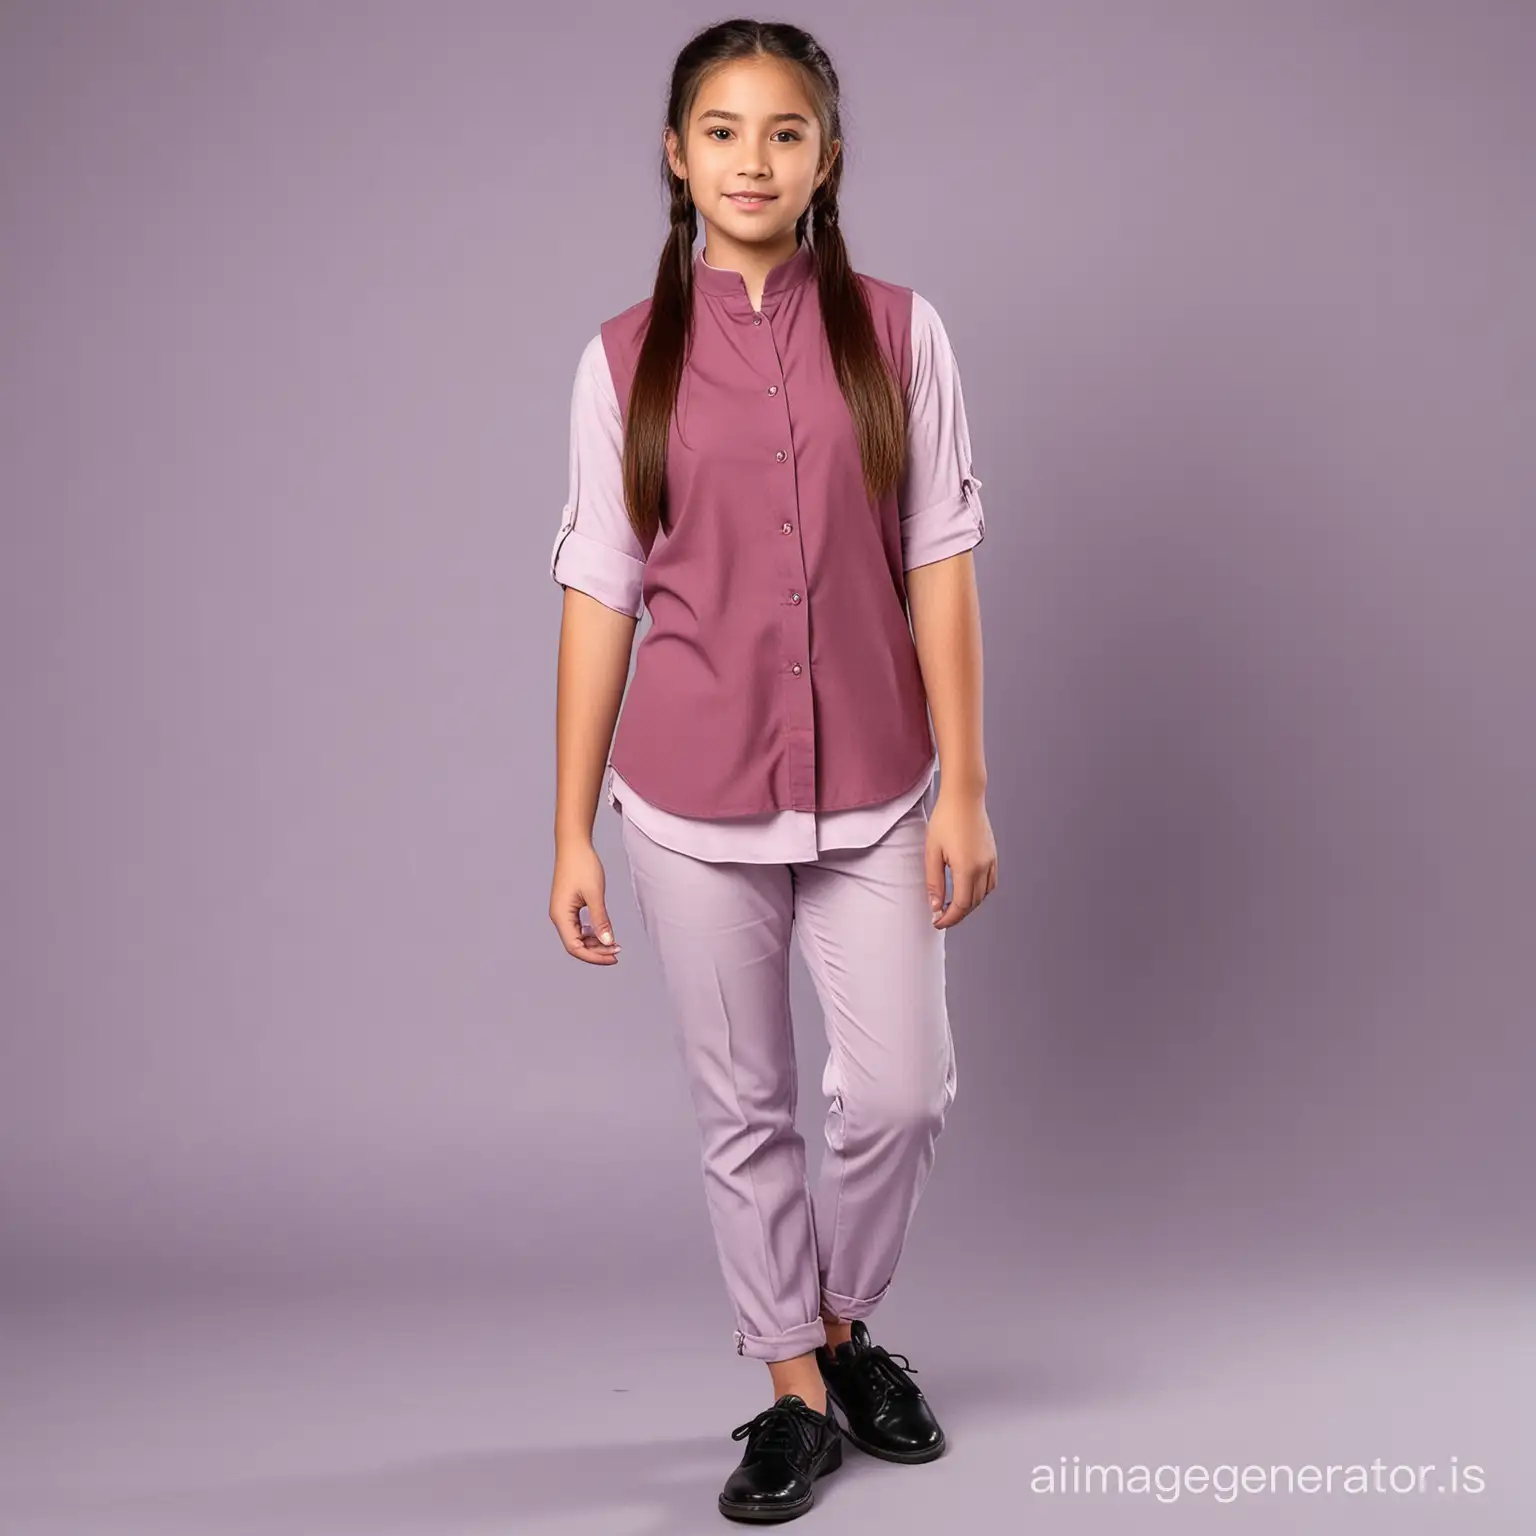 Teenage-Girl-in-Chic-Lavender-Outfit-with-Merlot-Accents